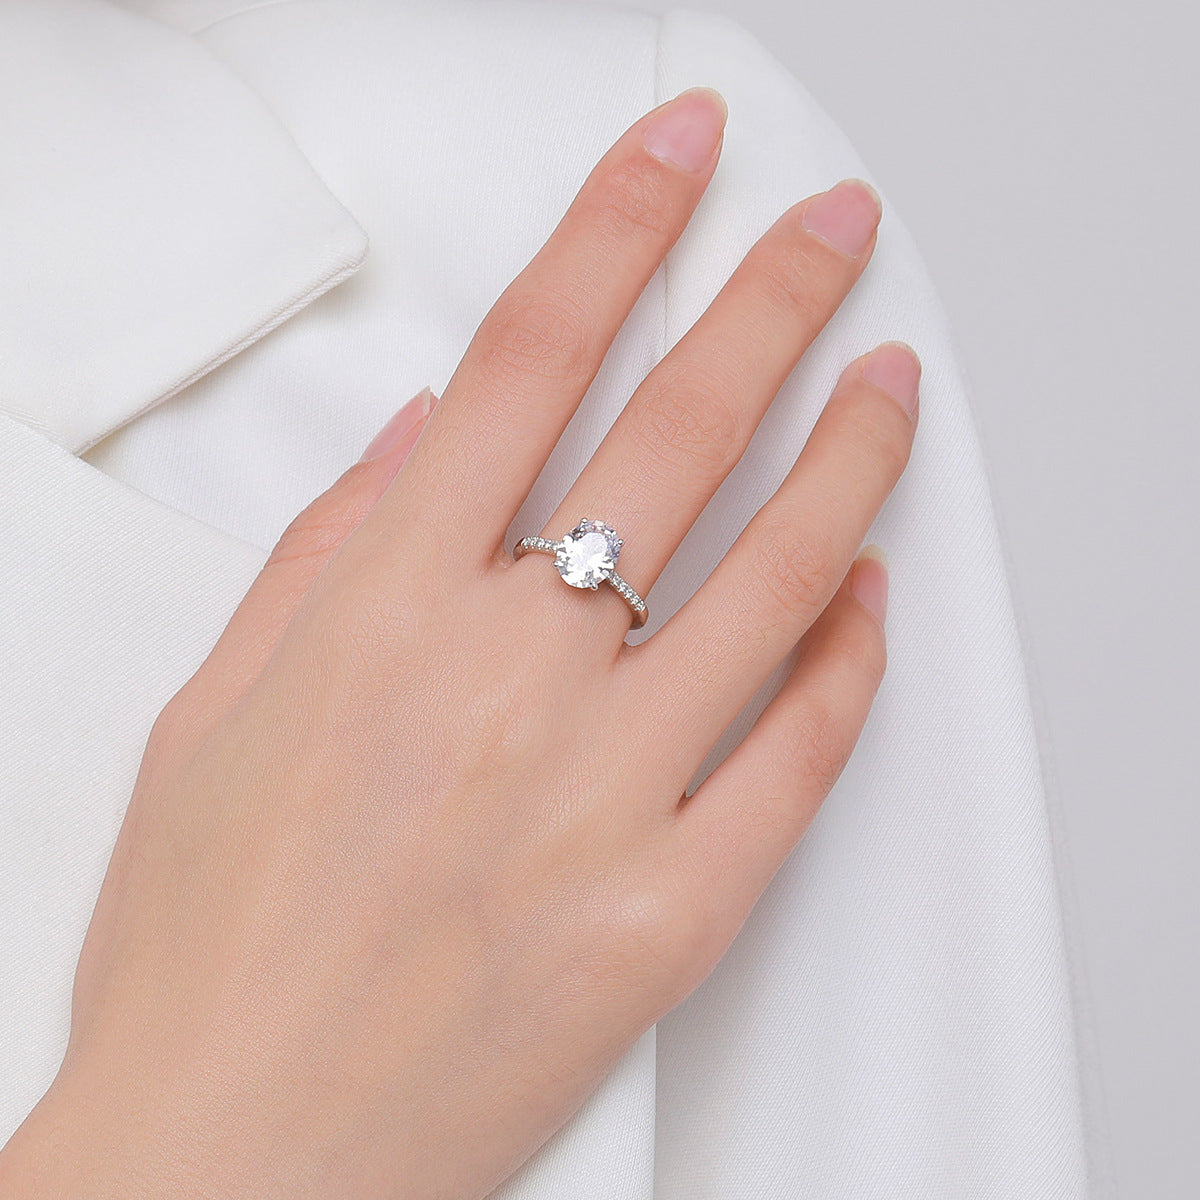 Sterling Silver Zircon Ring: Chic and Elegant Luxury Accessory